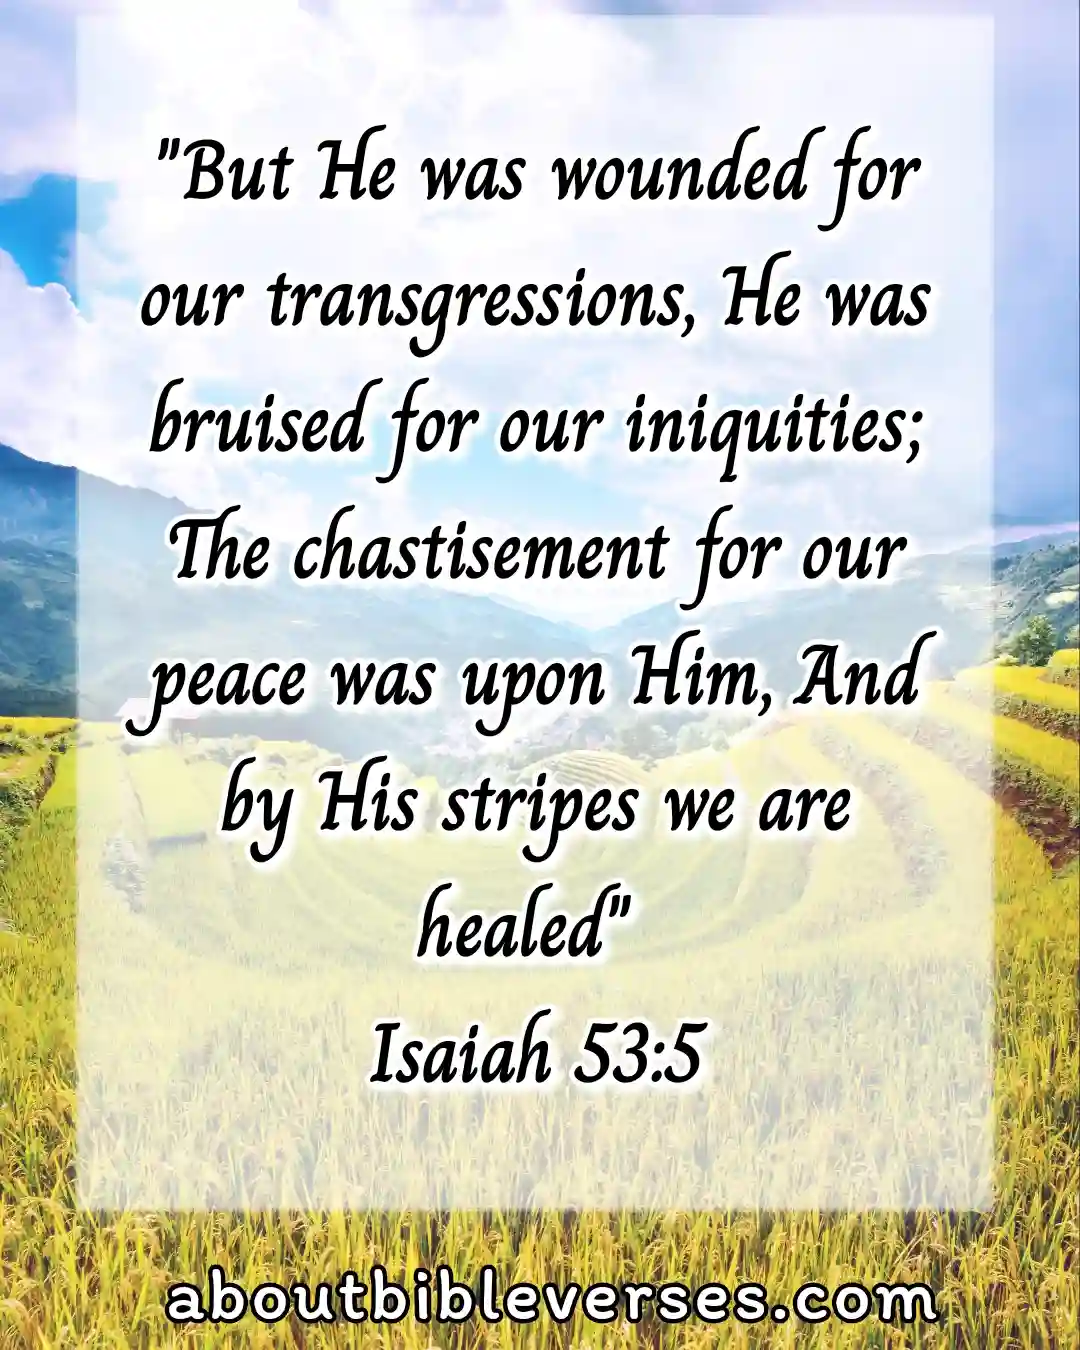 Bible Verses About Victory Over Sickness And Disease (Isaiah 53:5)